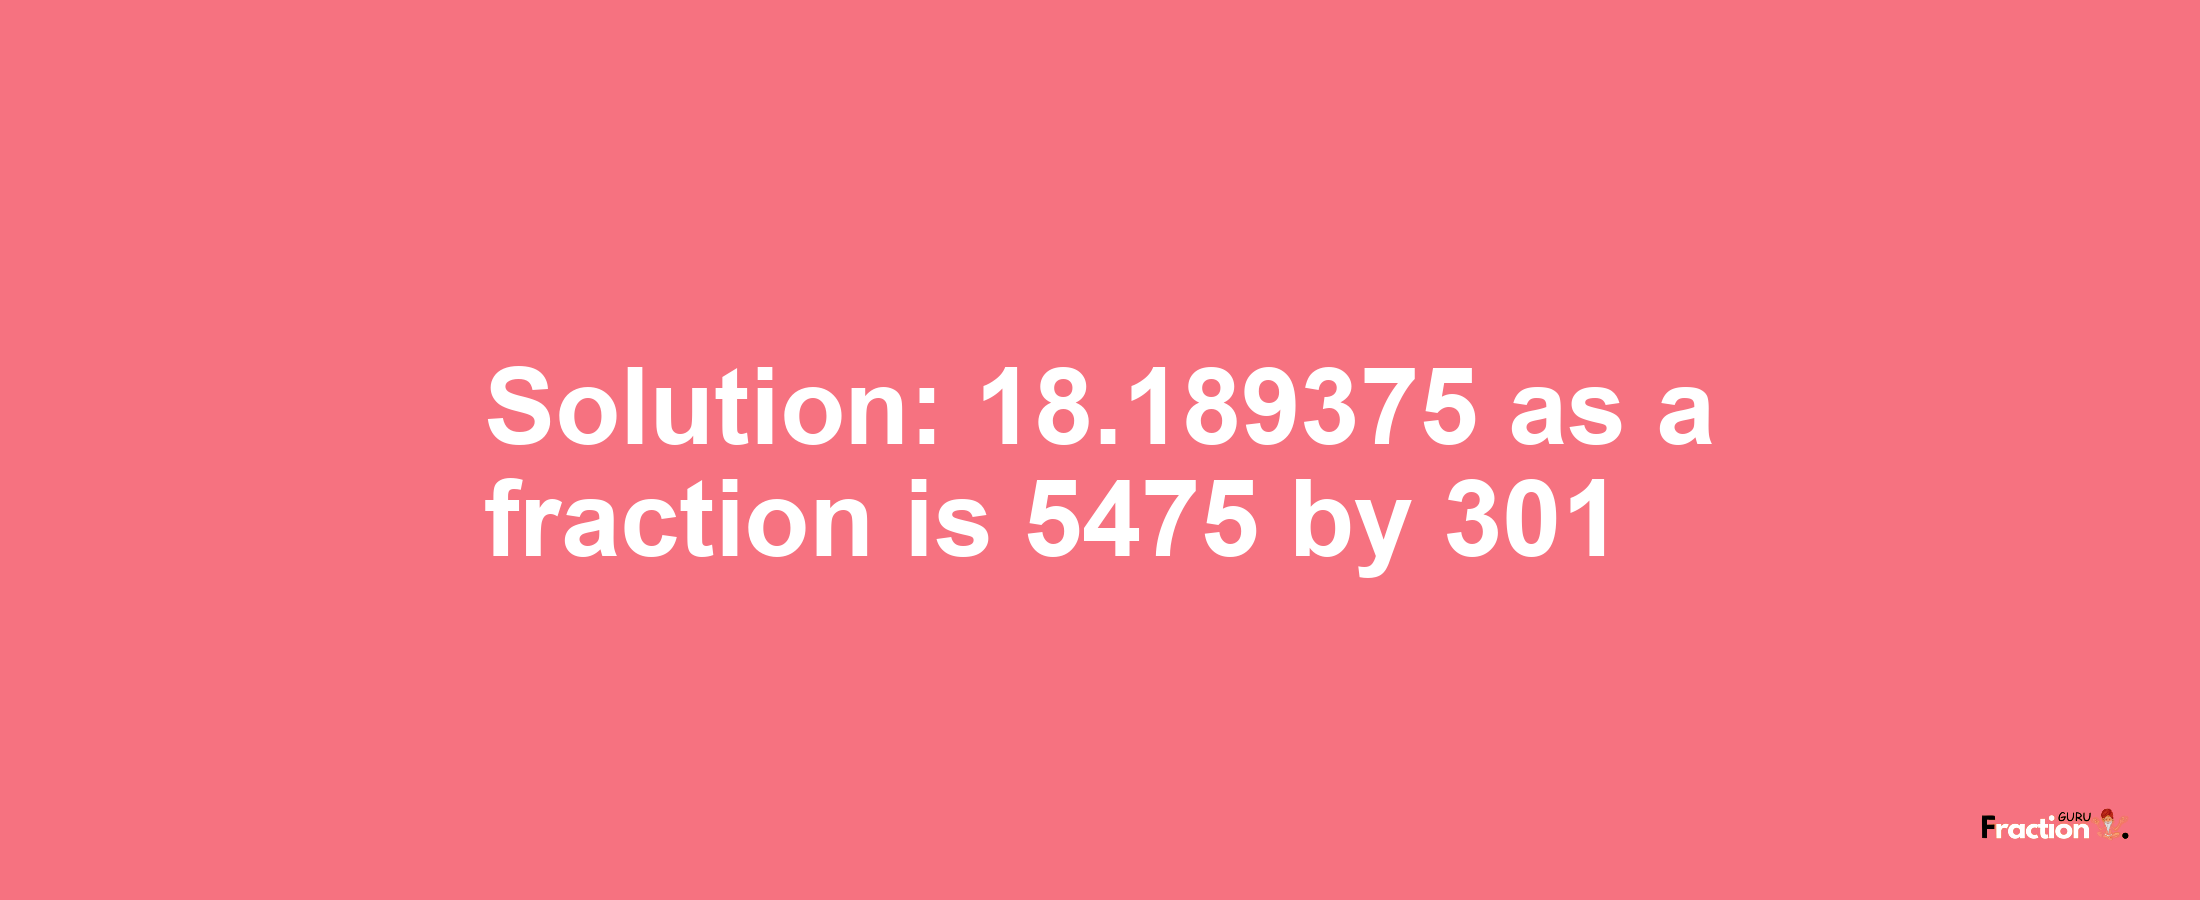 Solution:18.189375 as a fraction is 5475/301